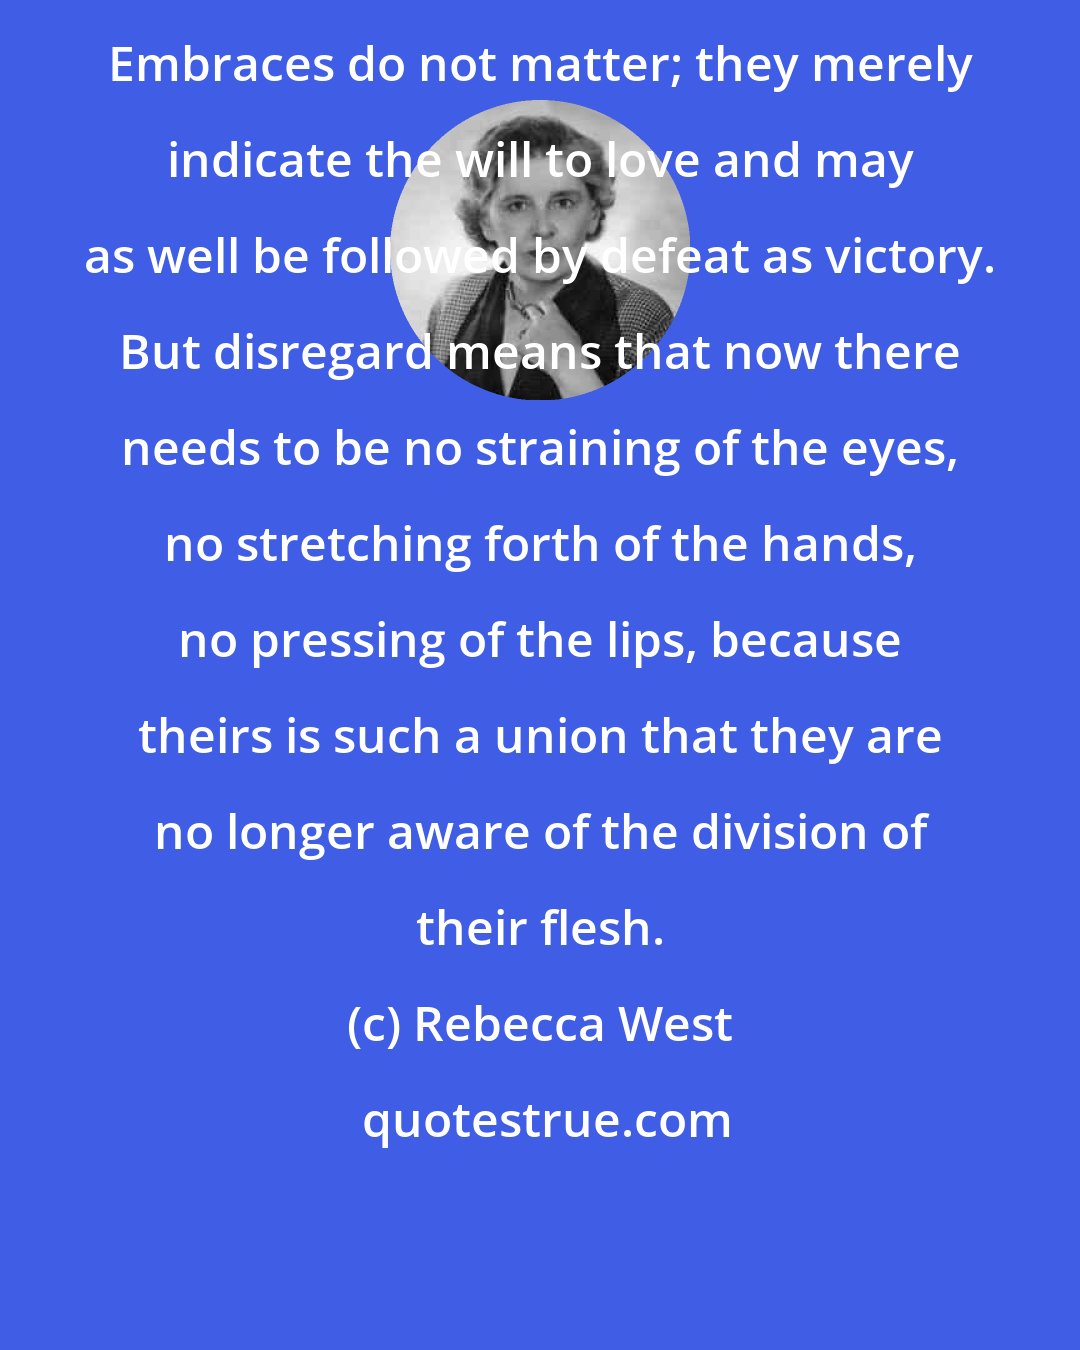 Rebecca West: Embraces do not matter; they merely indicate the will to love and may as well be followed by defeat as victory. But disregard means that now there needs to be no straining of the eyes, no stretching forth of the hands, no pressing of the lips, because theirs is such a union that they are no longer aware of the division of their flesh.